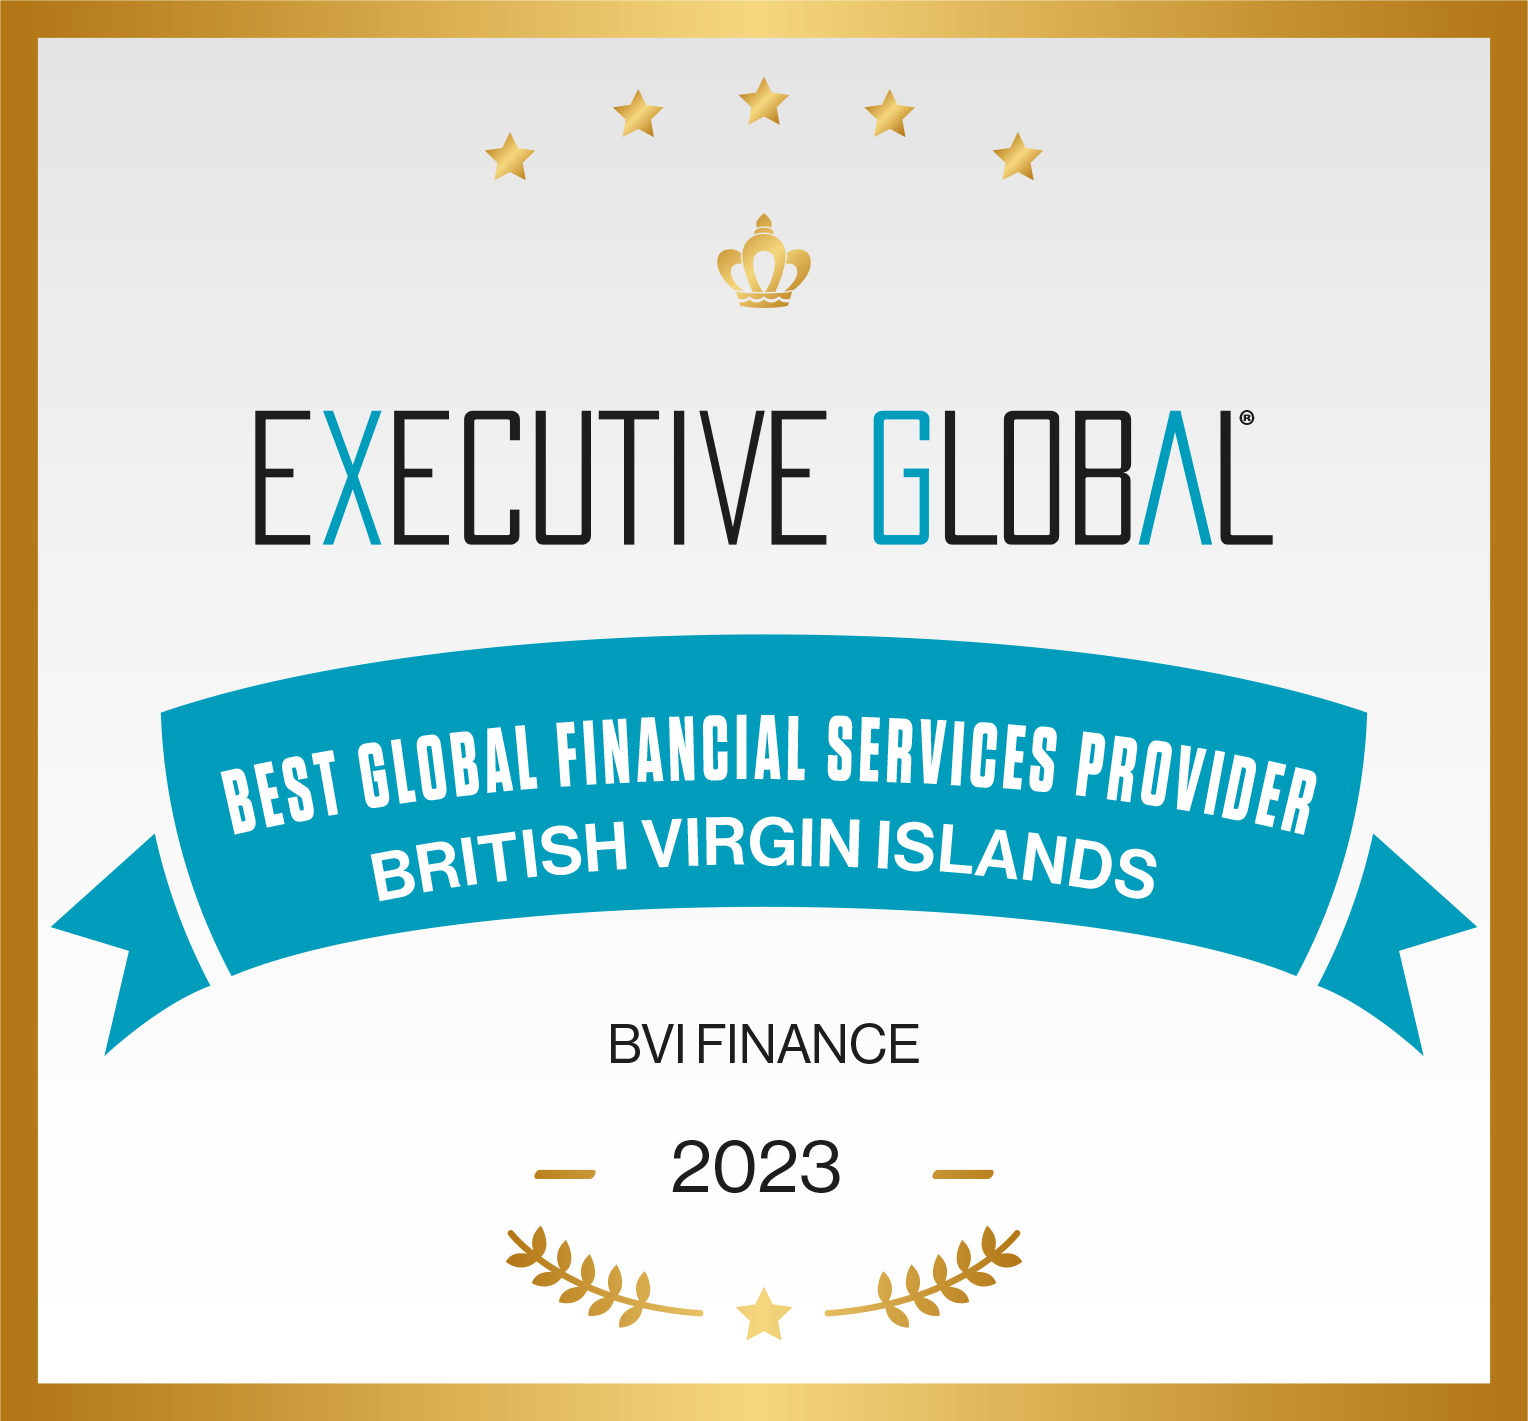 BVI FINANCE AWARDED 2023 BEST GLOBAL FINANCIAL SERVICES PROVIDER BY EXECUTIVE GLOBAL